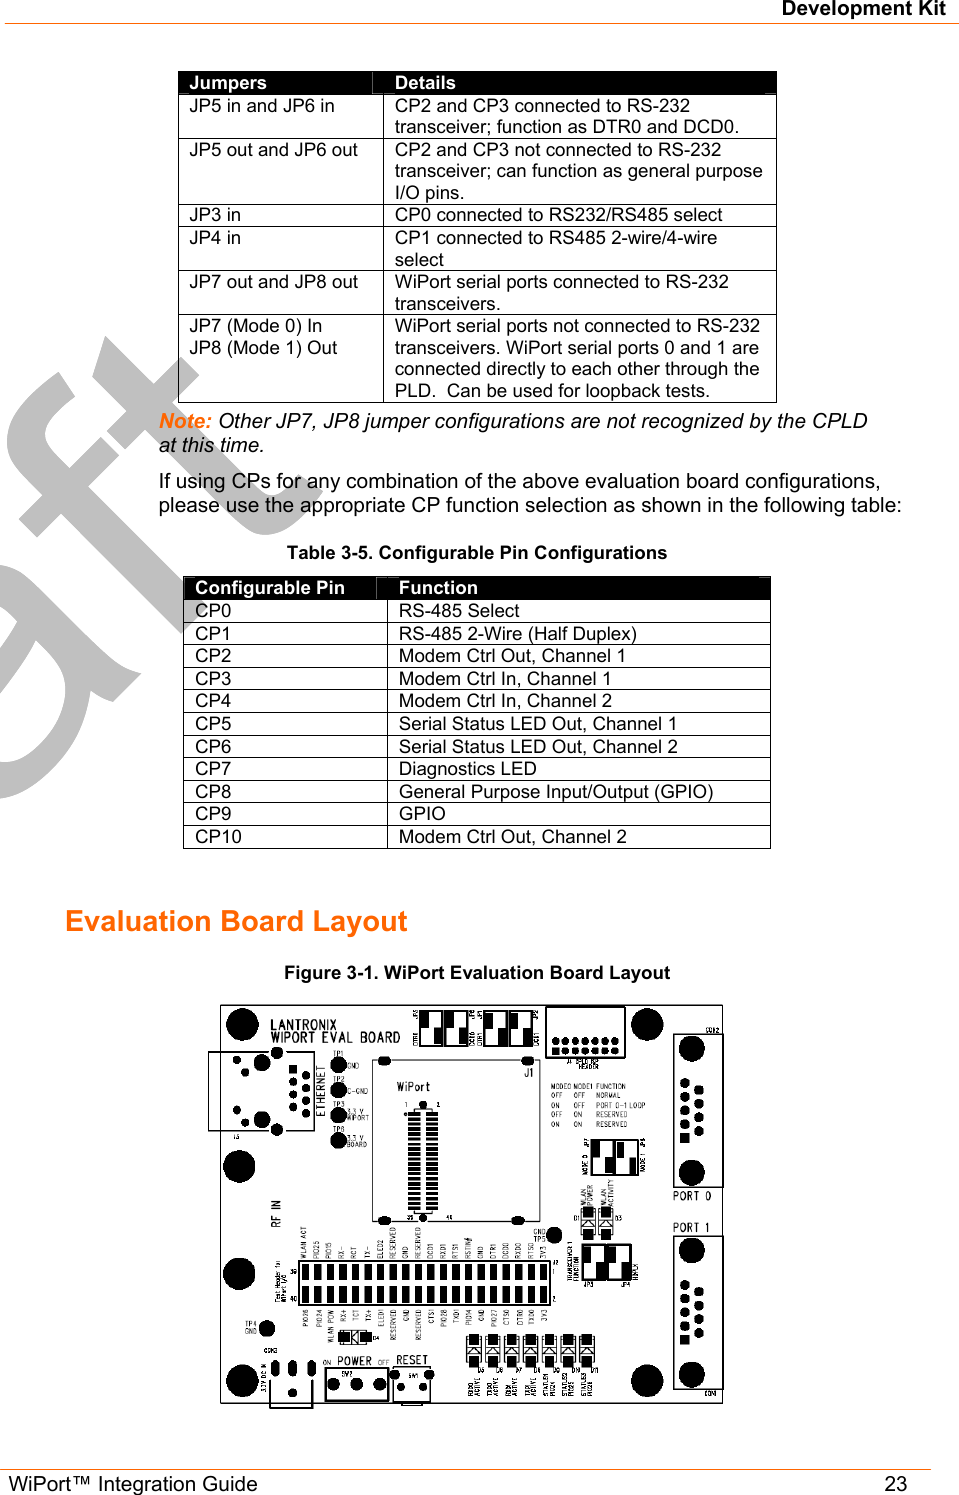 Development Kit WiPort™ Integration Guide   23 Jumpers  Details JP5 in and JP6 in  CP2 and CP3 connected to RS-232 transceiver; function as DTR0 and DCD0. JP5 out and JP6 out  CP2 and CP3 not connected to RS-232 transceiver; can function as general purpose I/O pins. JP3 in  CP0 connected to RS232/RS485 select JP4 in  CP1 connected to RS485 2-wire/4-wire select JP7 out and JP8 out  WiPort serial ports connected to RS-232 transceivers. JP7 (Mode 0) In JP8 (Mode 1) Out WiPort serial ports not connected to RS-232 transceivers. WiPort serial ports 0 and 1 are connected directly to each other through the PLD.  Can be used for loopback tests. Note: Other JP7, JP8 jumper configurations are not recognized by the CPLD at this time. If using CPs for any combination of the above evaluation board configurations, please use the appropriate CP function selection as shown in the following table: Table 3-5. Configurable Pin Configurations Configurable Pin  Function CP0 RS-485 Select CP1  RS-485 2-Wire (Half Duplex) CP2  Modem Ctrl Out, Channel 1 CP3  Modem Ctrl In, Channel 1 CP4  Modem Ctrl In, Channel 2 CP5  Serial Status LED Out, Channel 1 CP6  Serial Status LED Out, Channel 2 CP7 Diagnostics LED CP8  General Purpose Input/Output (GPIO) CP9 GPIO CP10  Modem Ctrl Out, Channel 2  Evaluation Board Layout  Figure 3-1. WiPort Evaluation Board Layout  